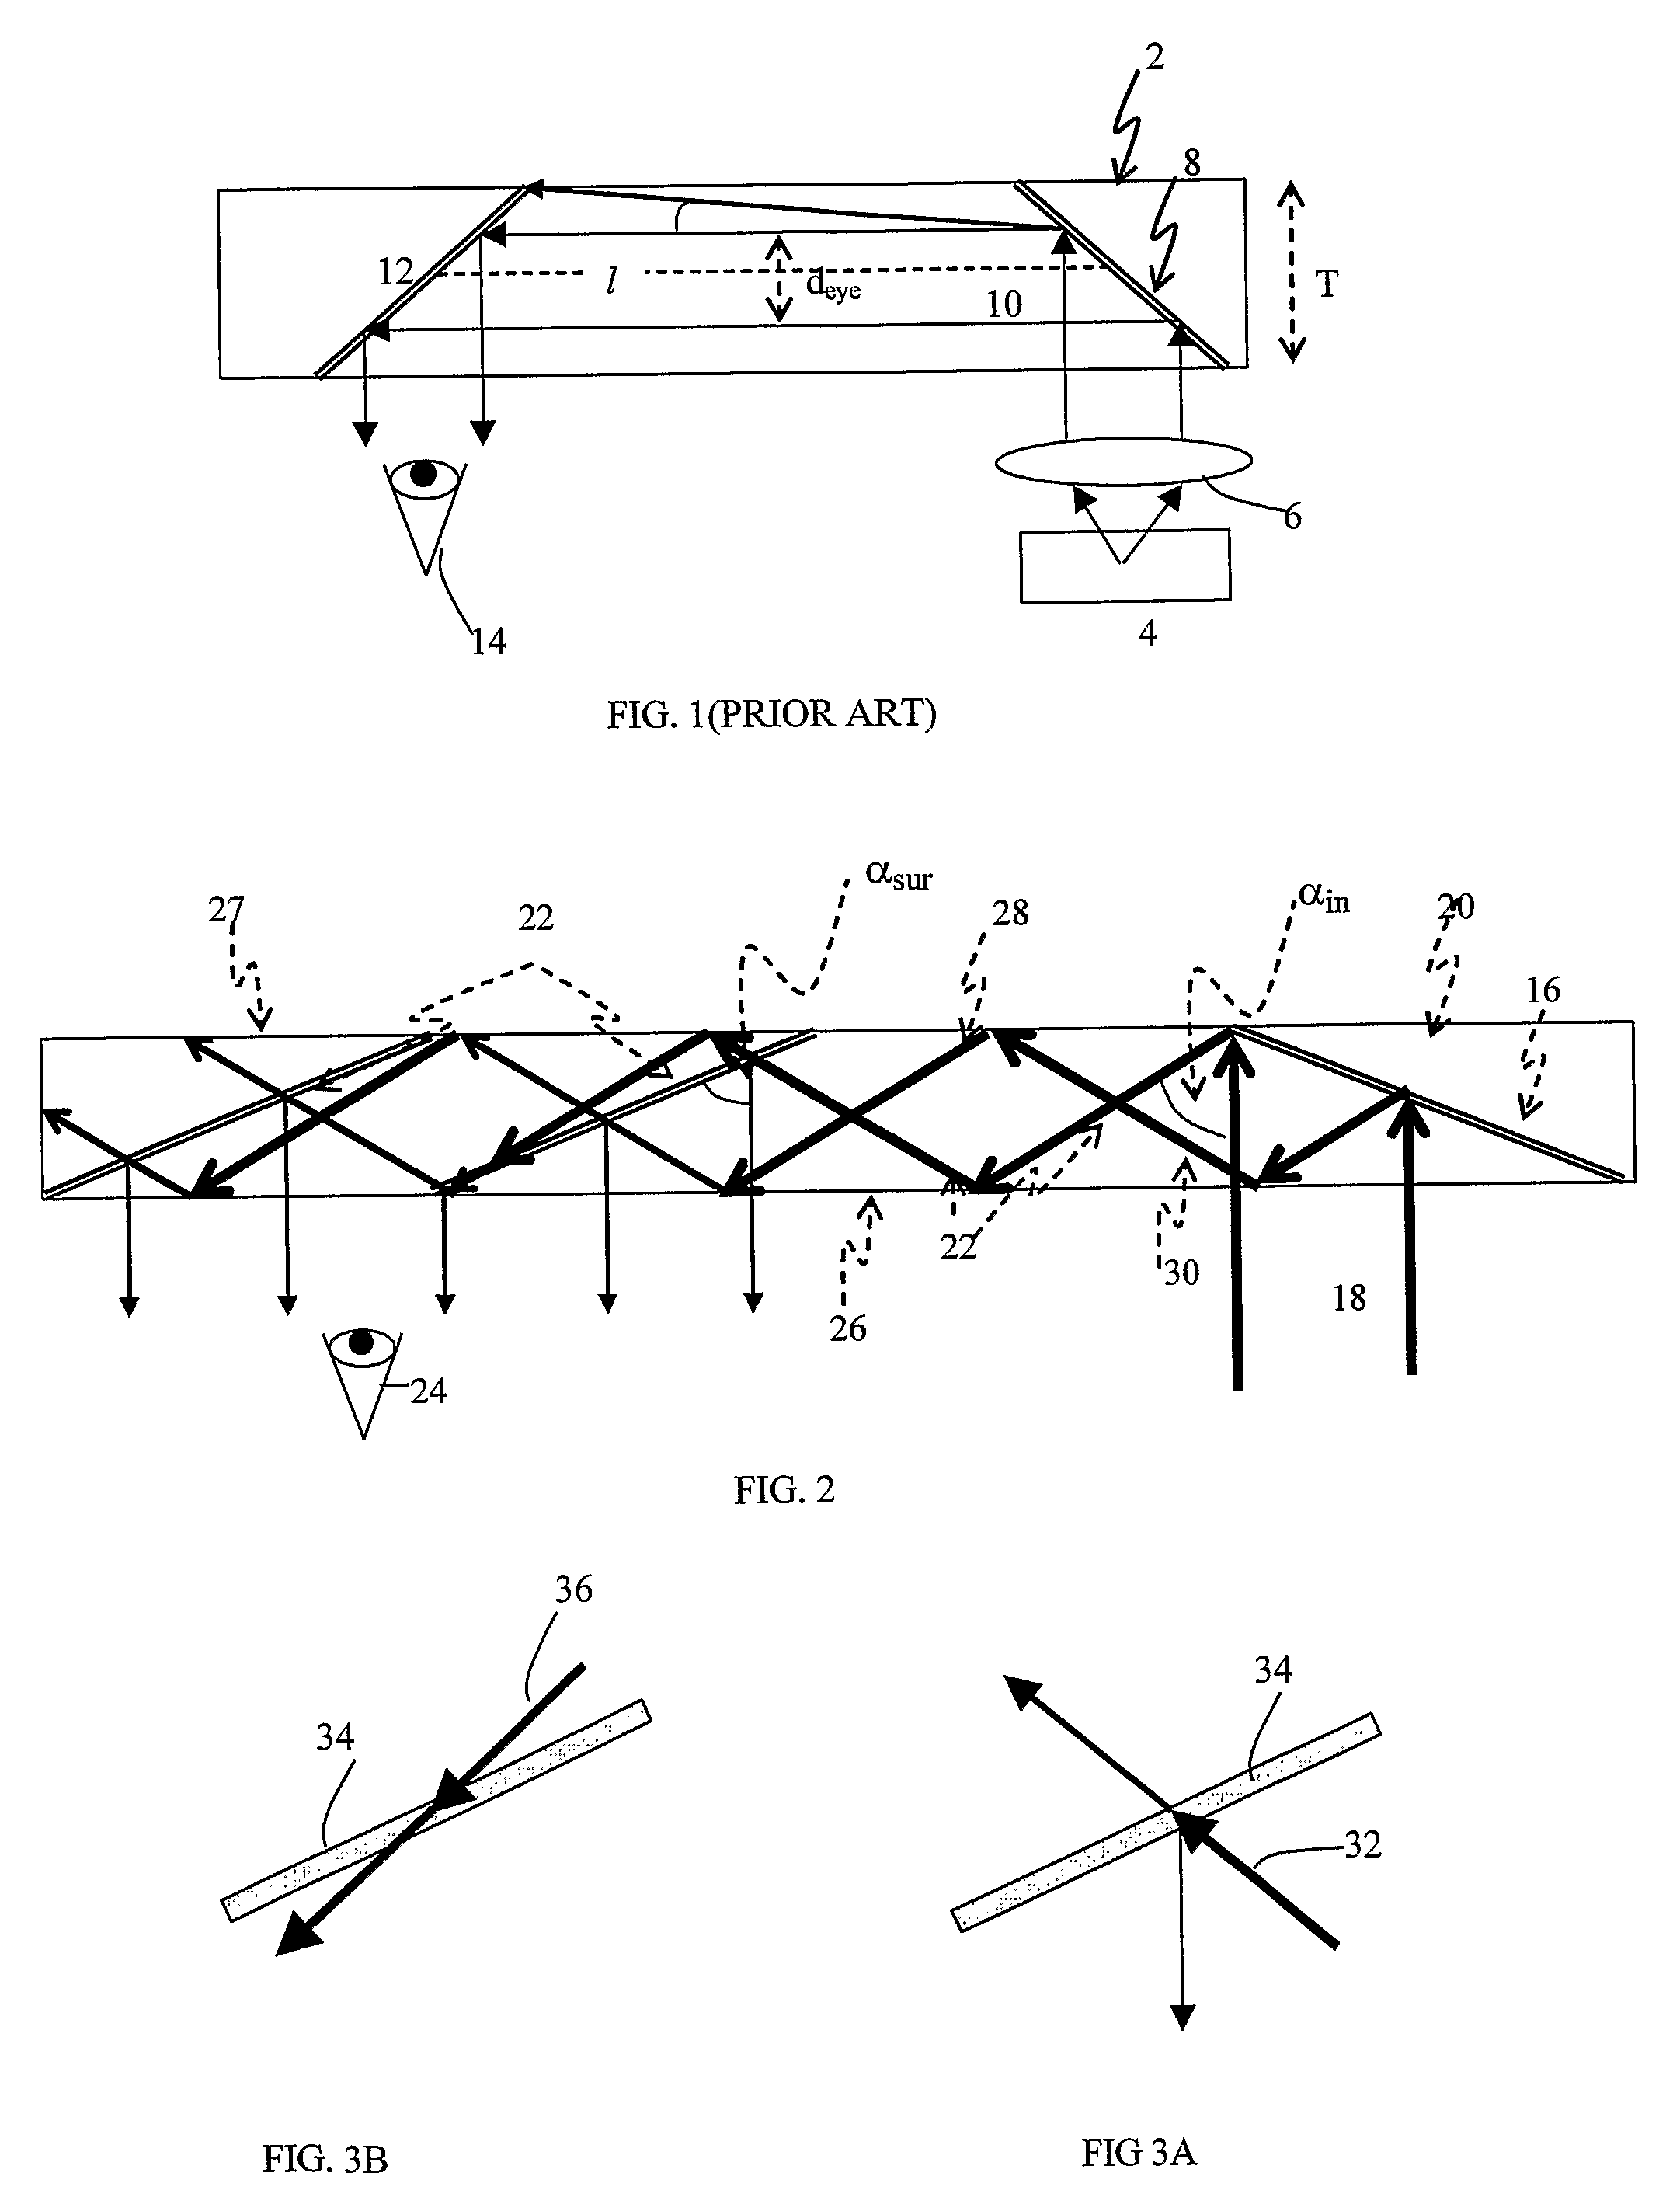 Substrate-guided optical device particularly for vision enhanced optical systems